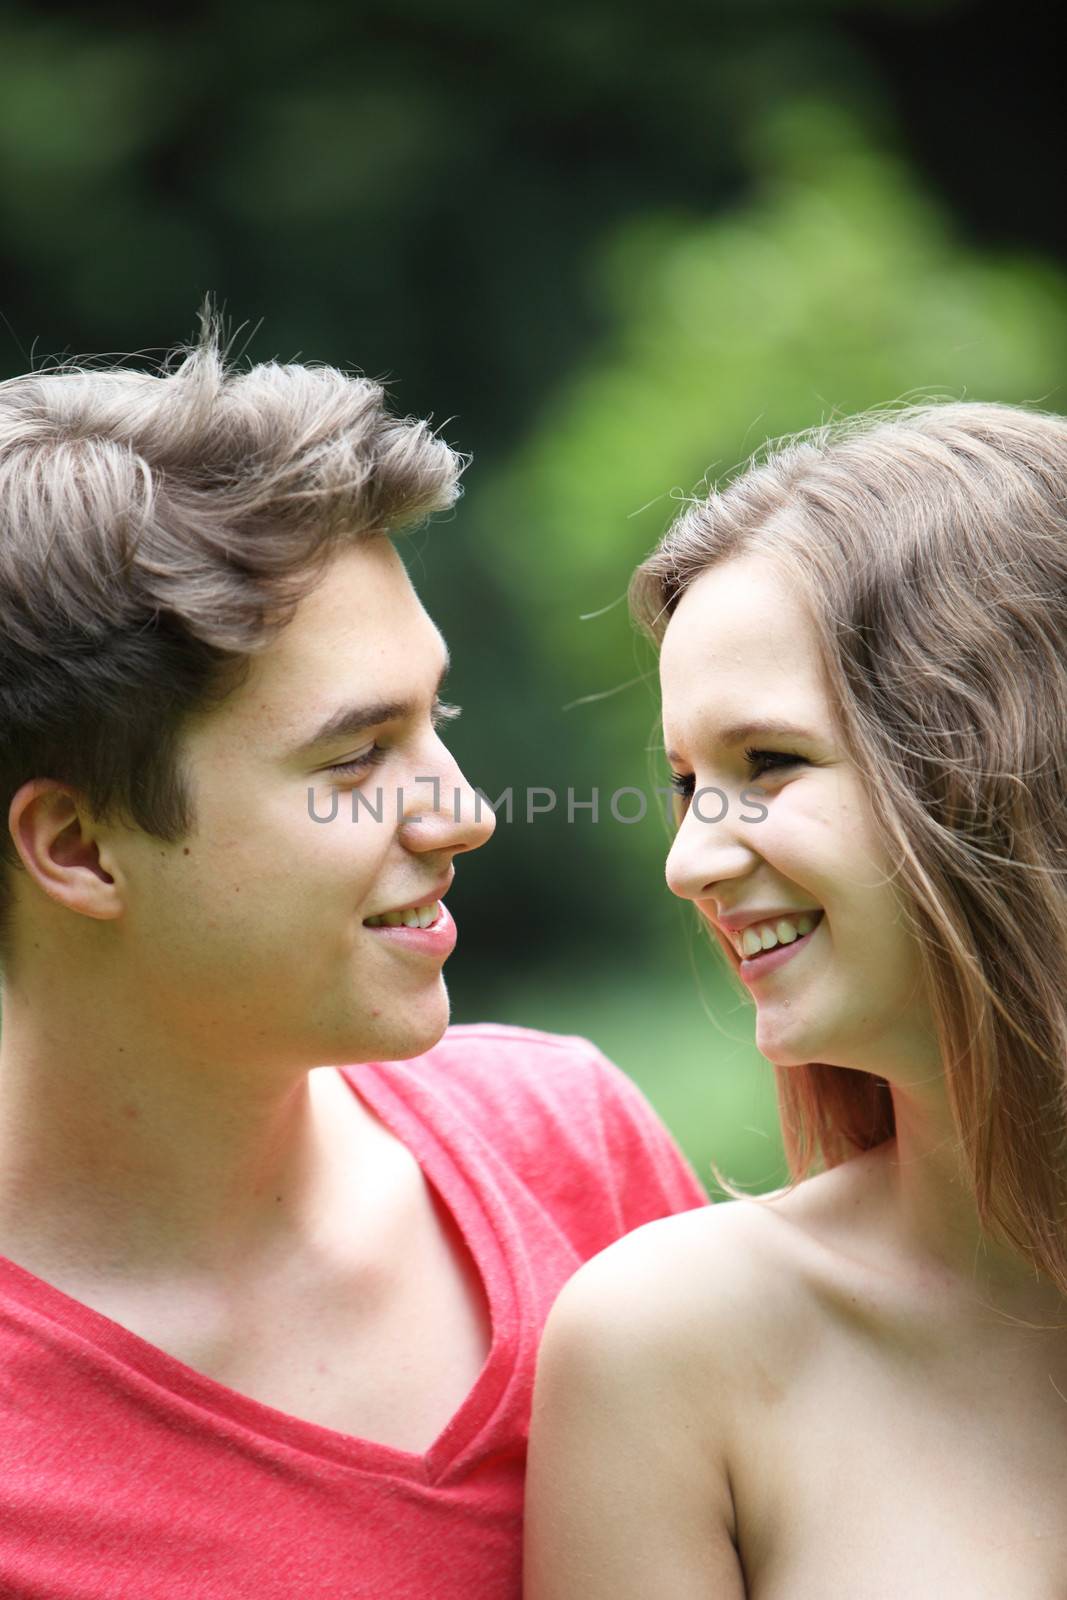 Attractive romantic young teenage couple laughing and smiling adoringly into each others eyes , closeup portrait